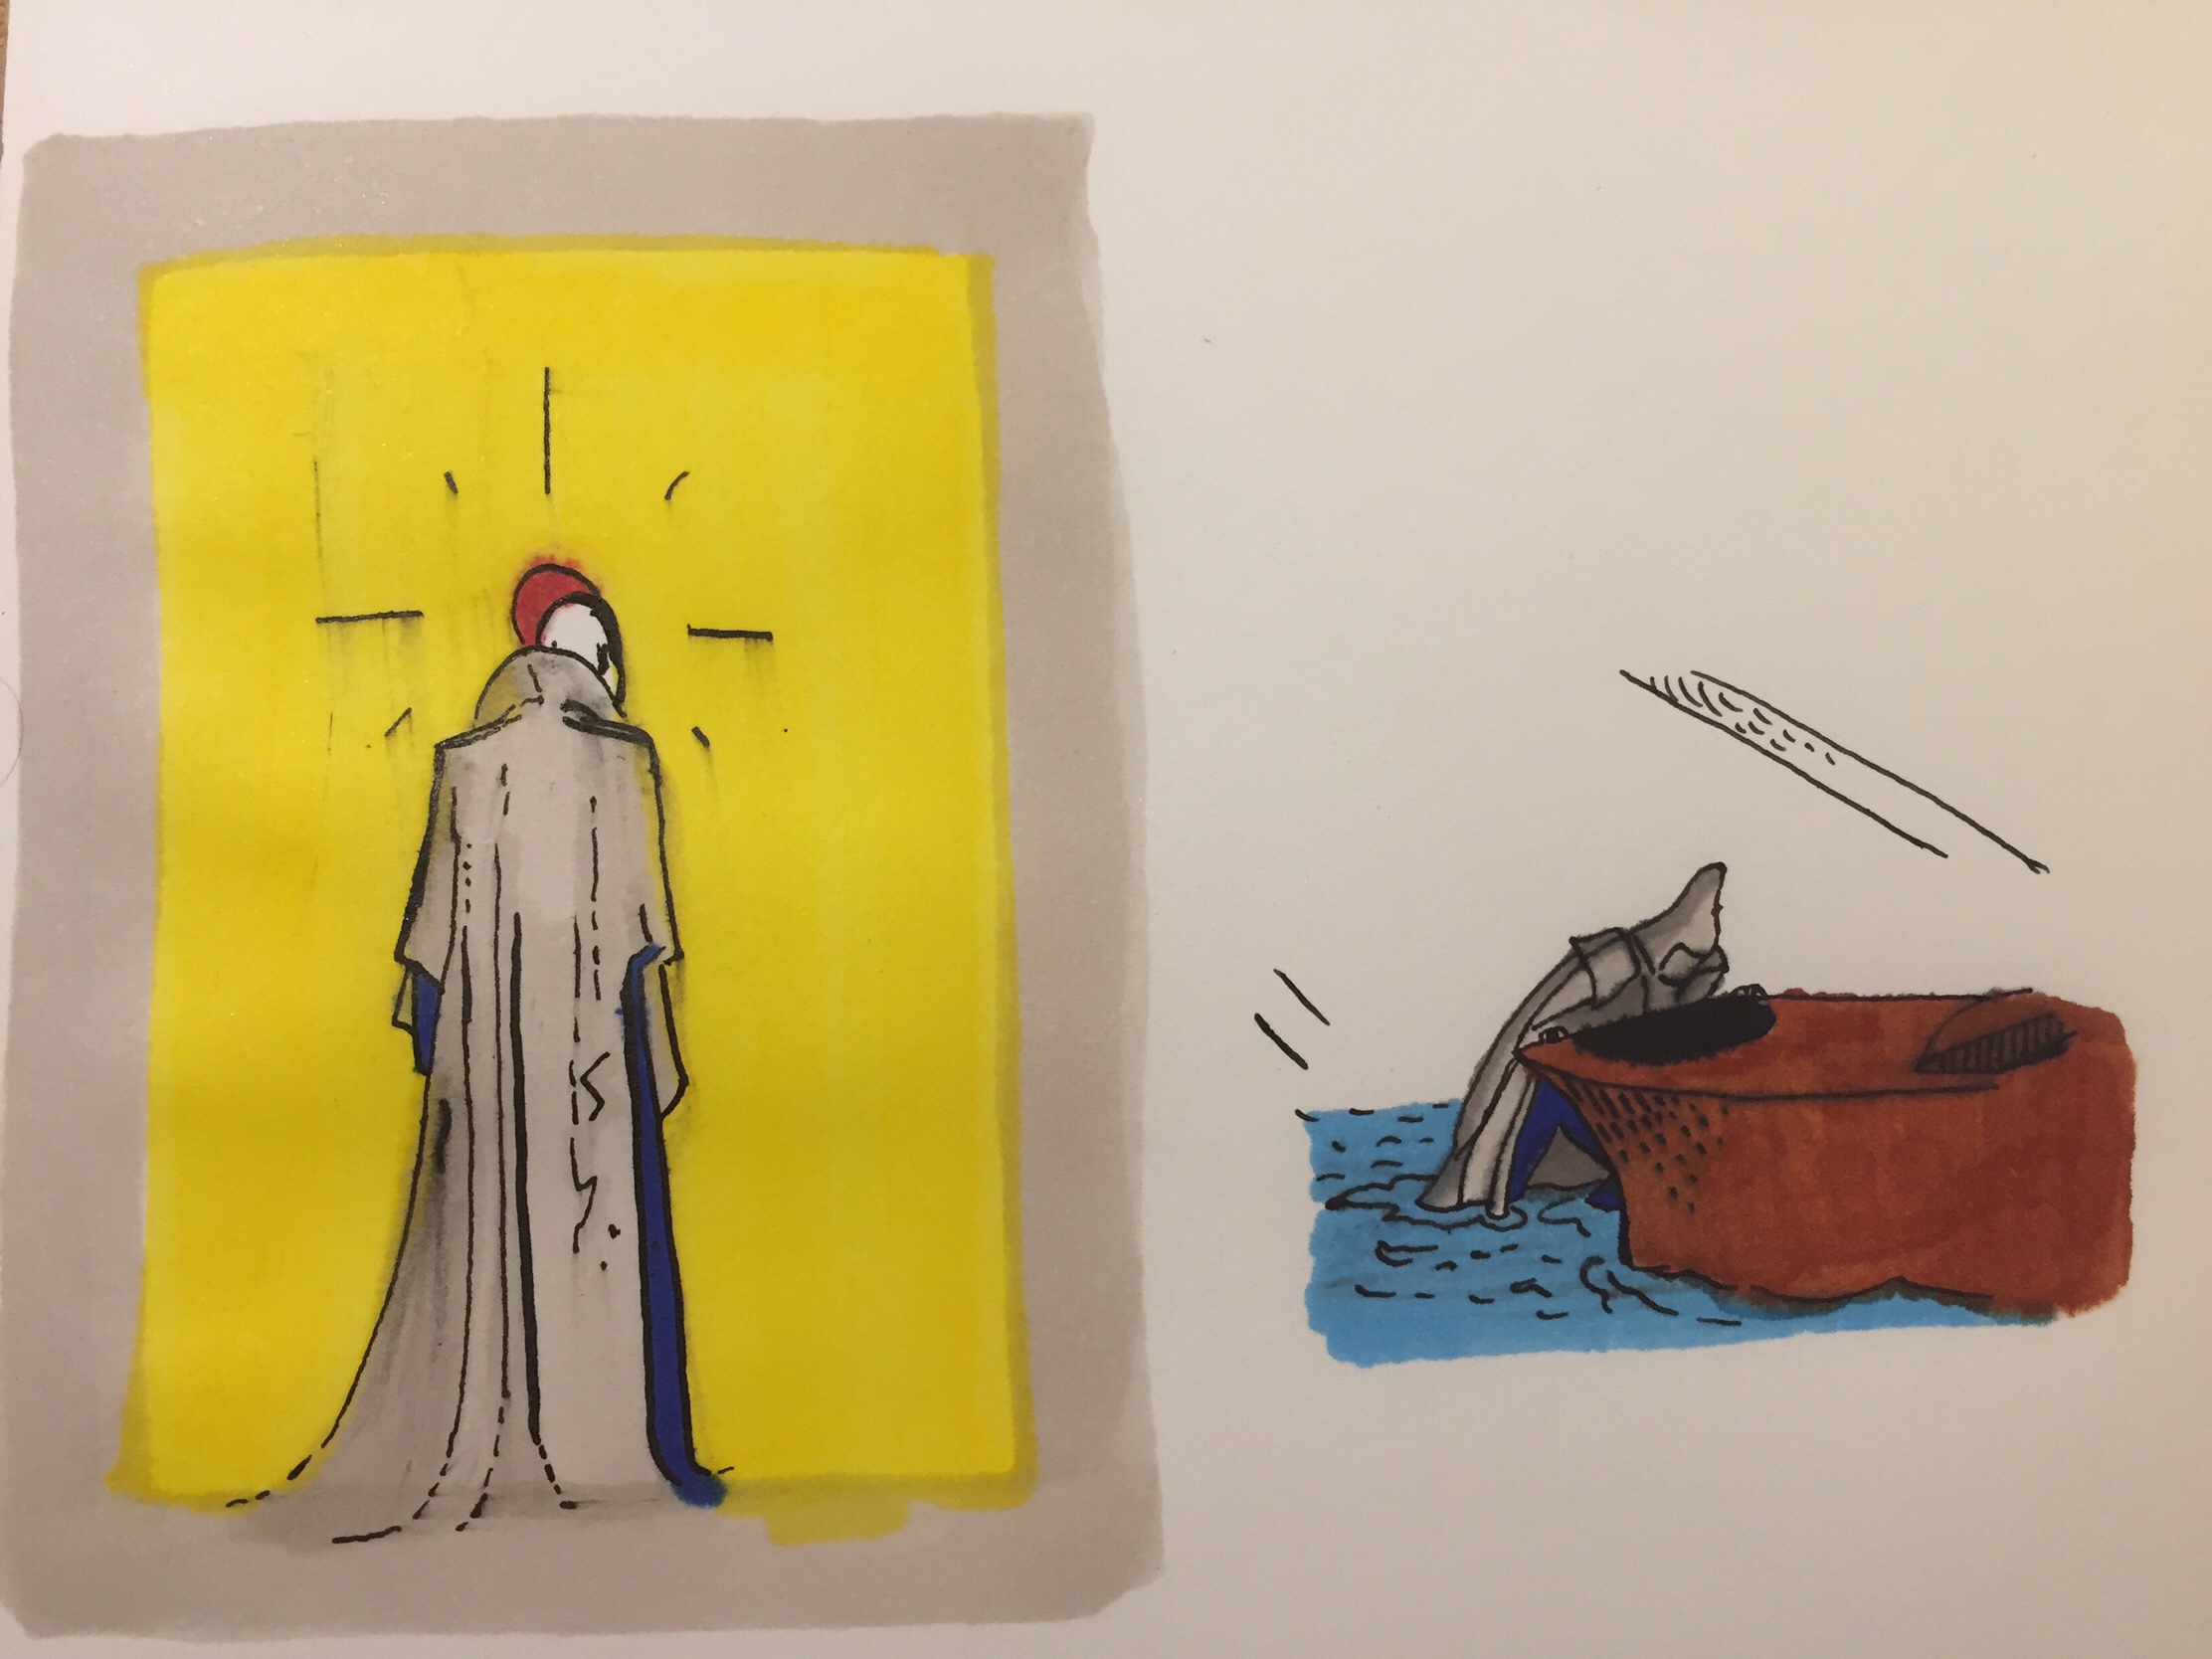 Two sketches of caped characters, one standing from behind, another in the water pushing a skiff